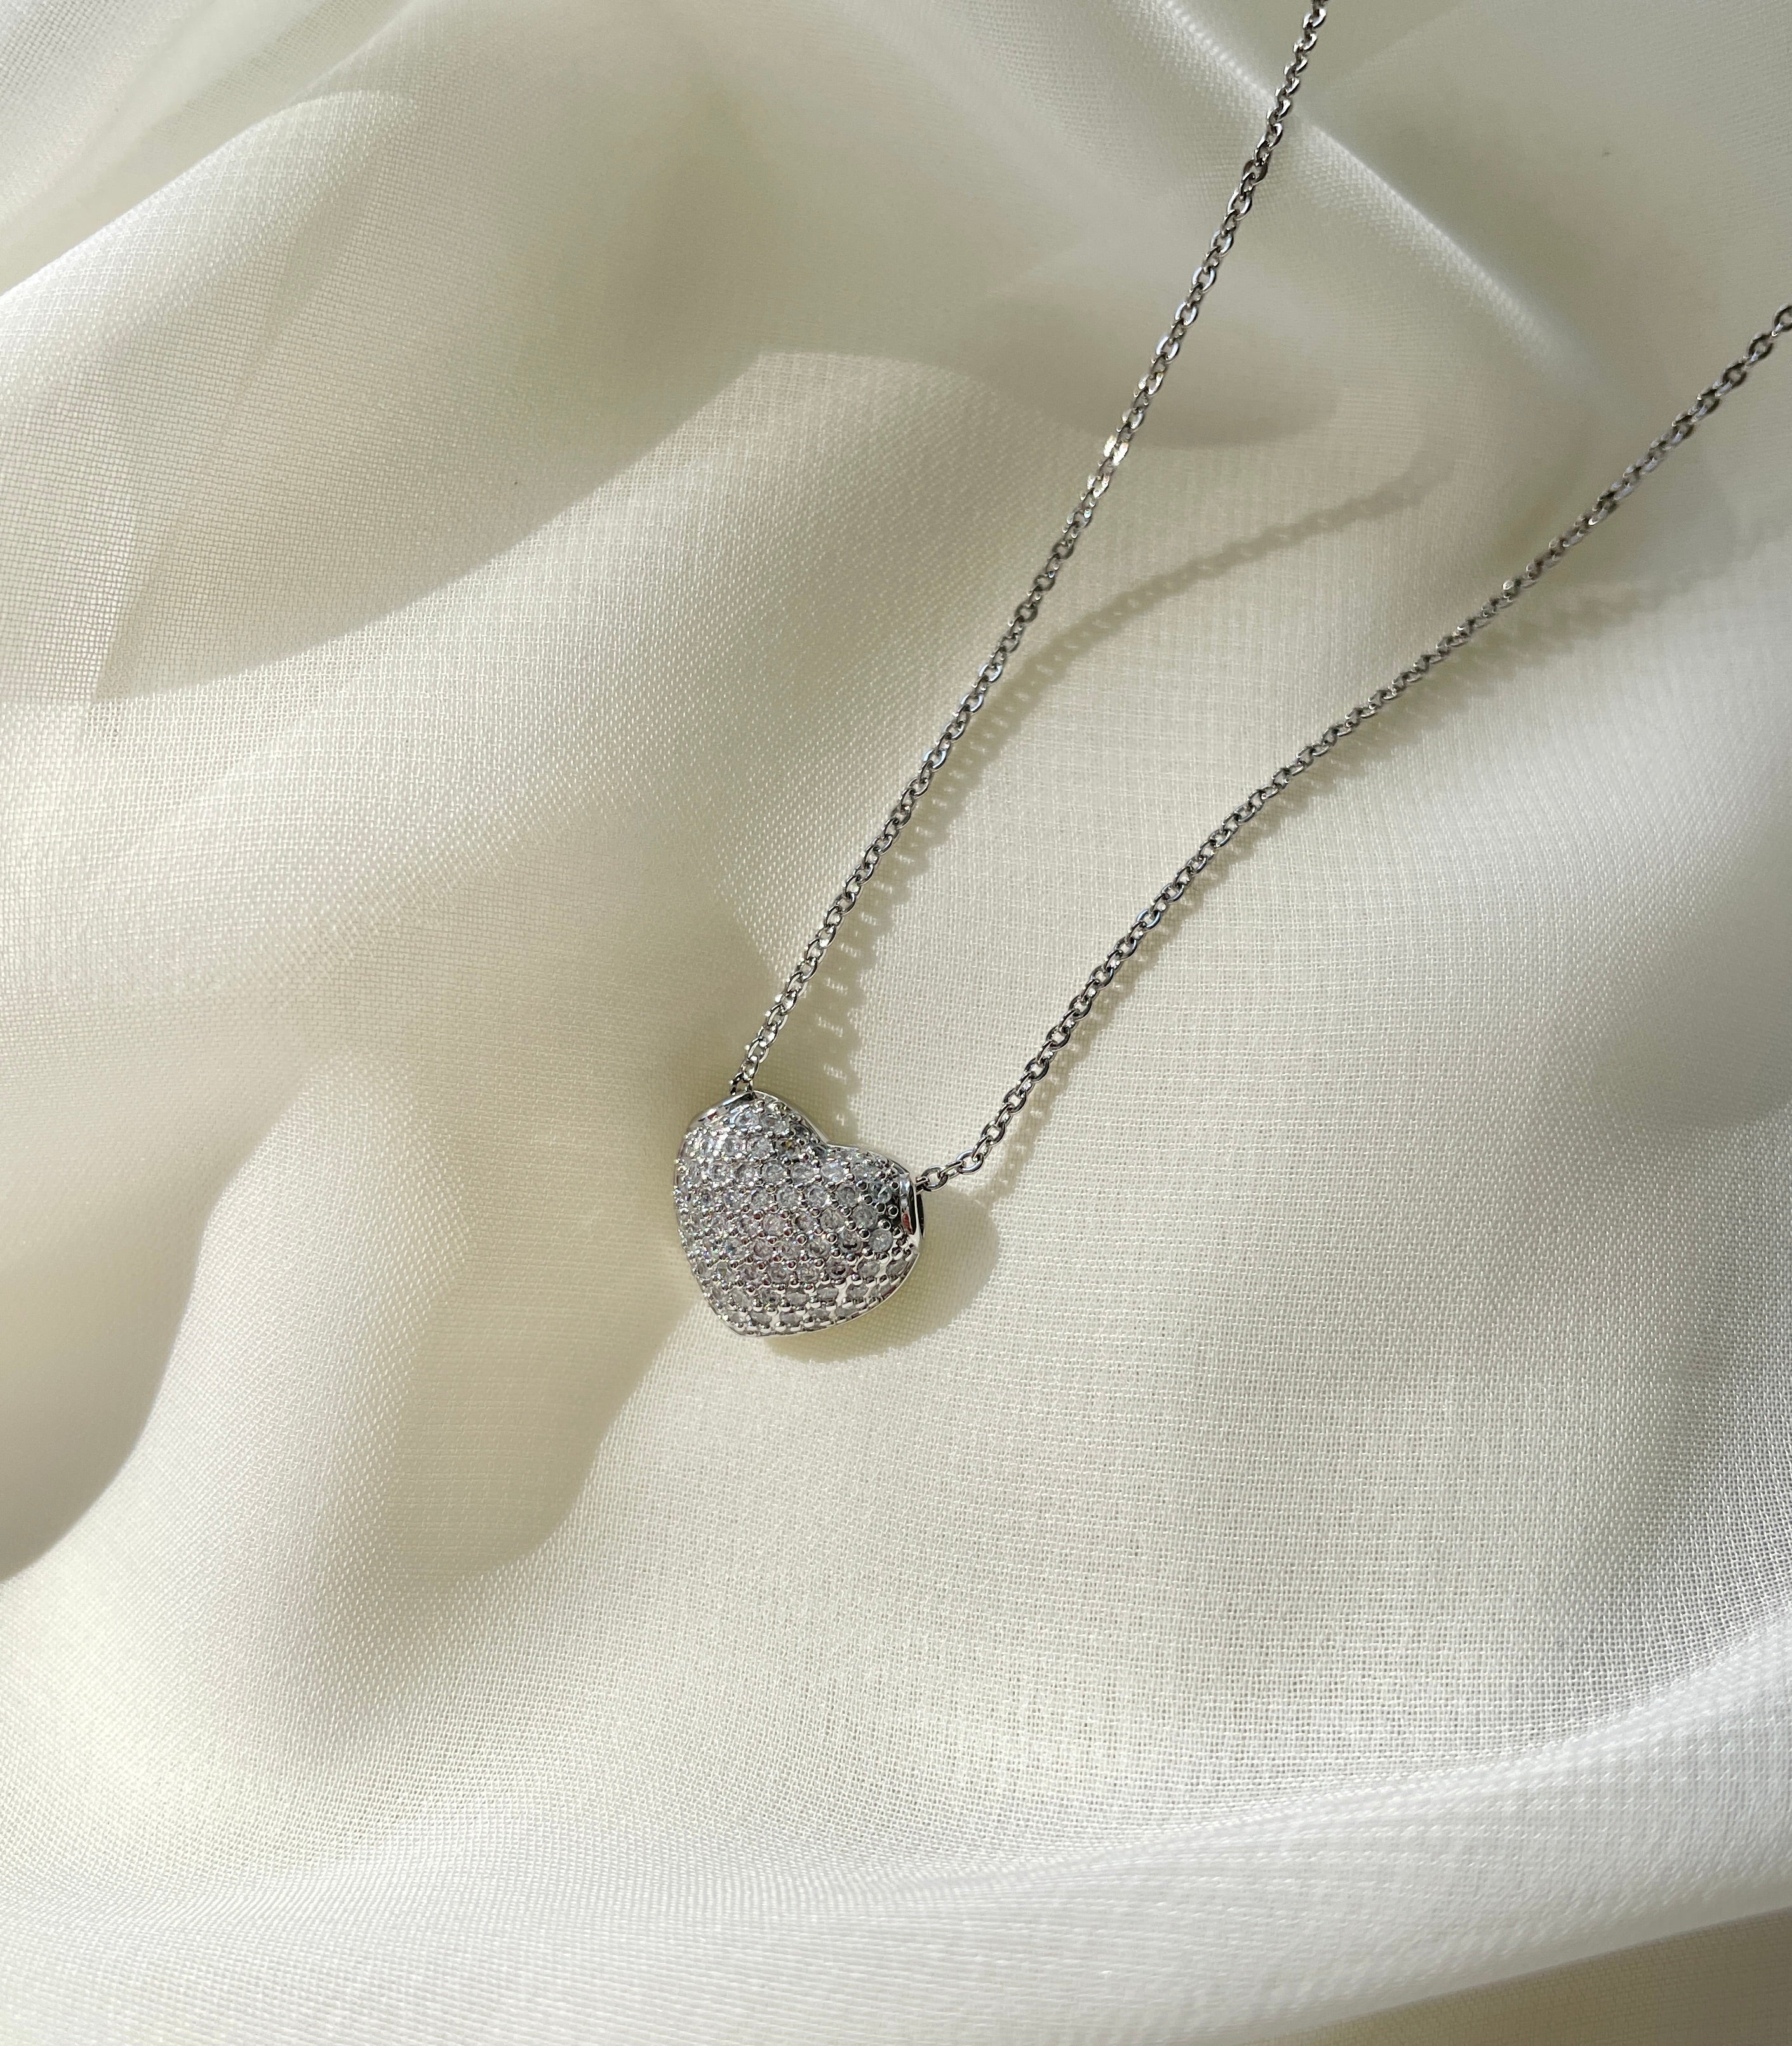 Be Mine Heart Necklace